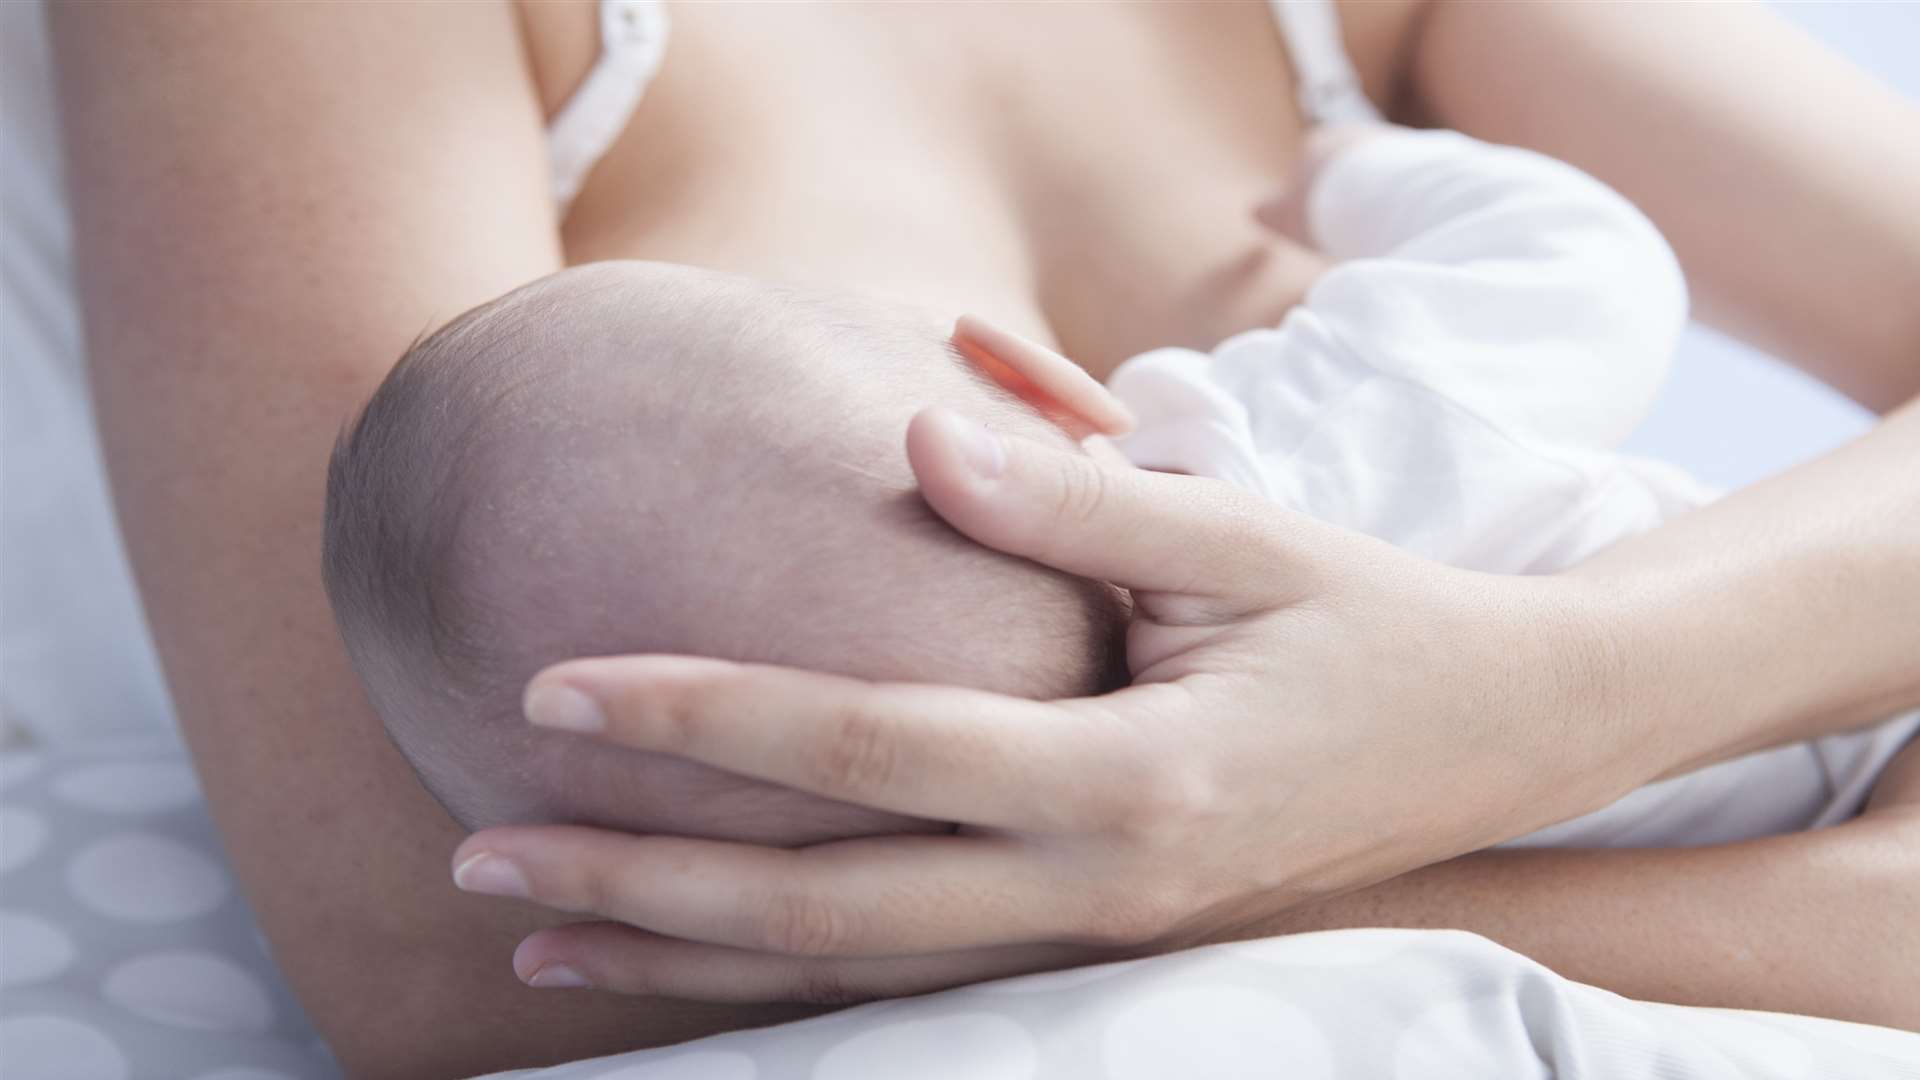 Breastfeeding services are being cut across Kent